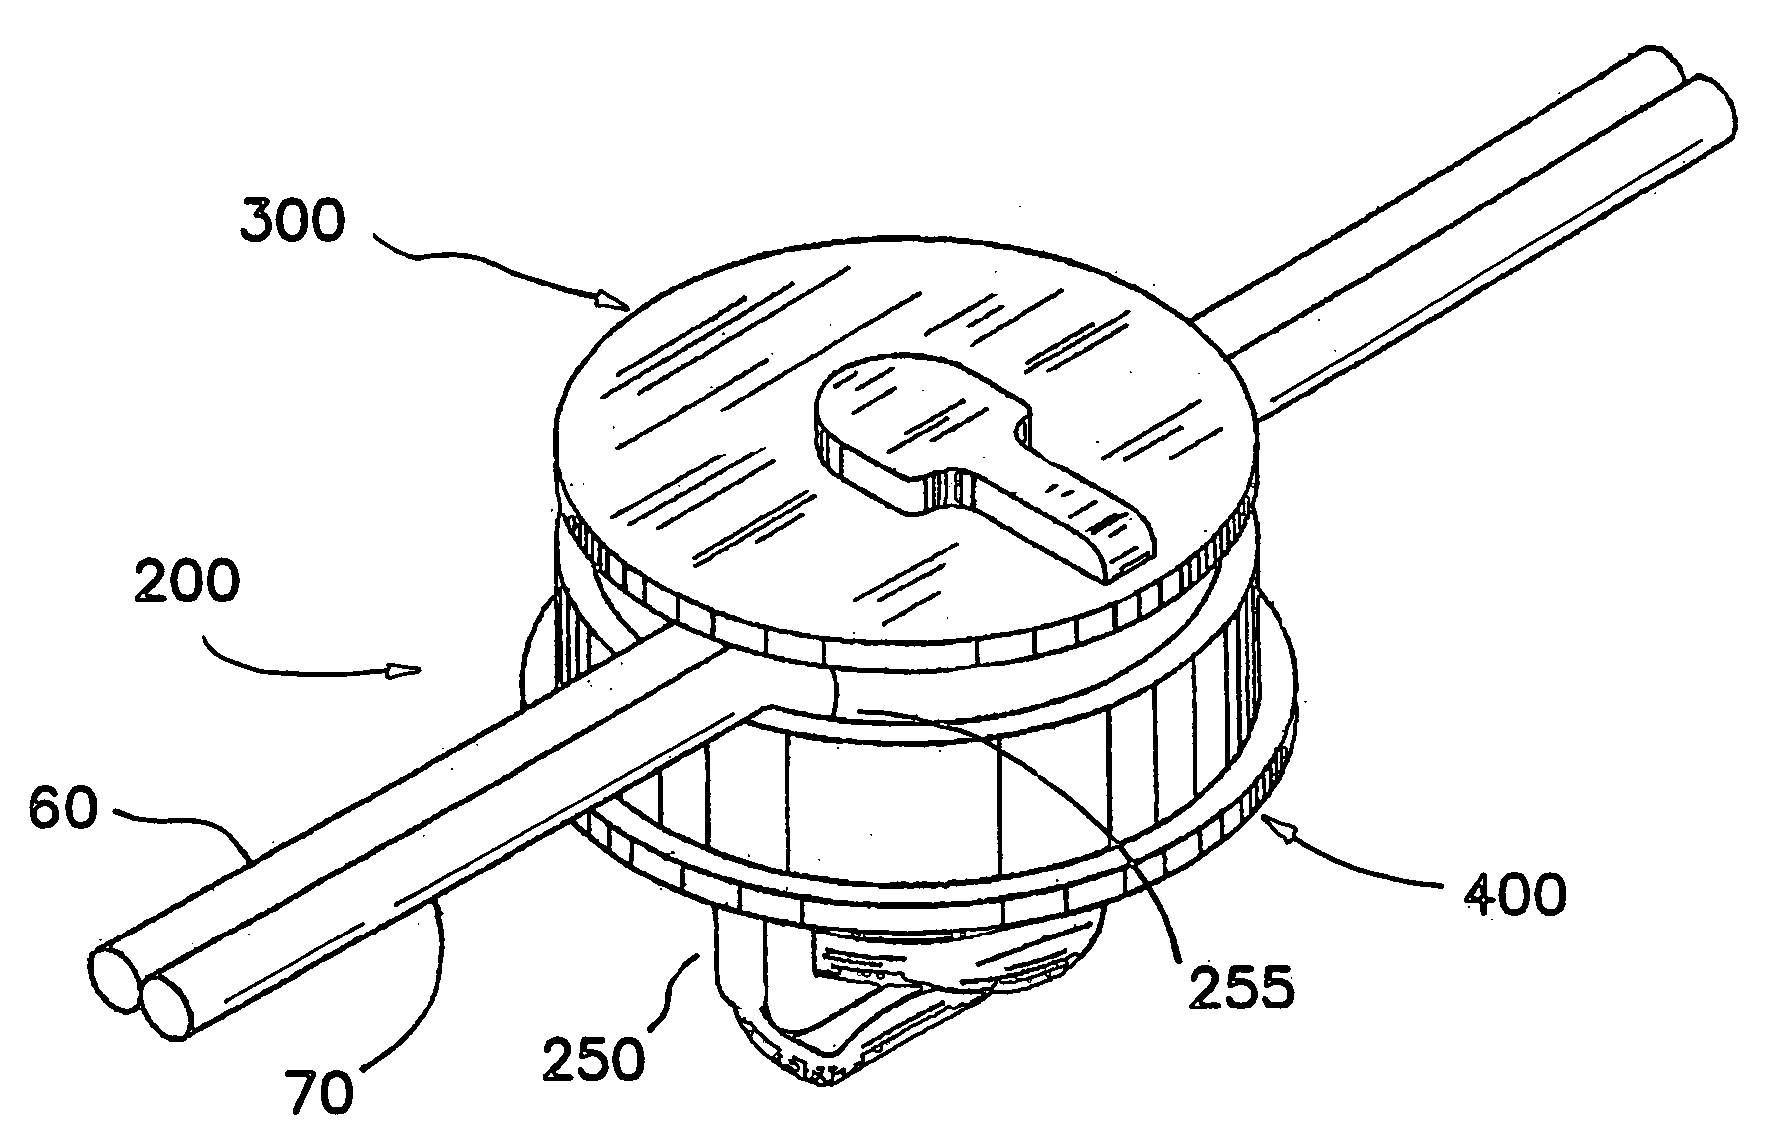 Suture securing device and method